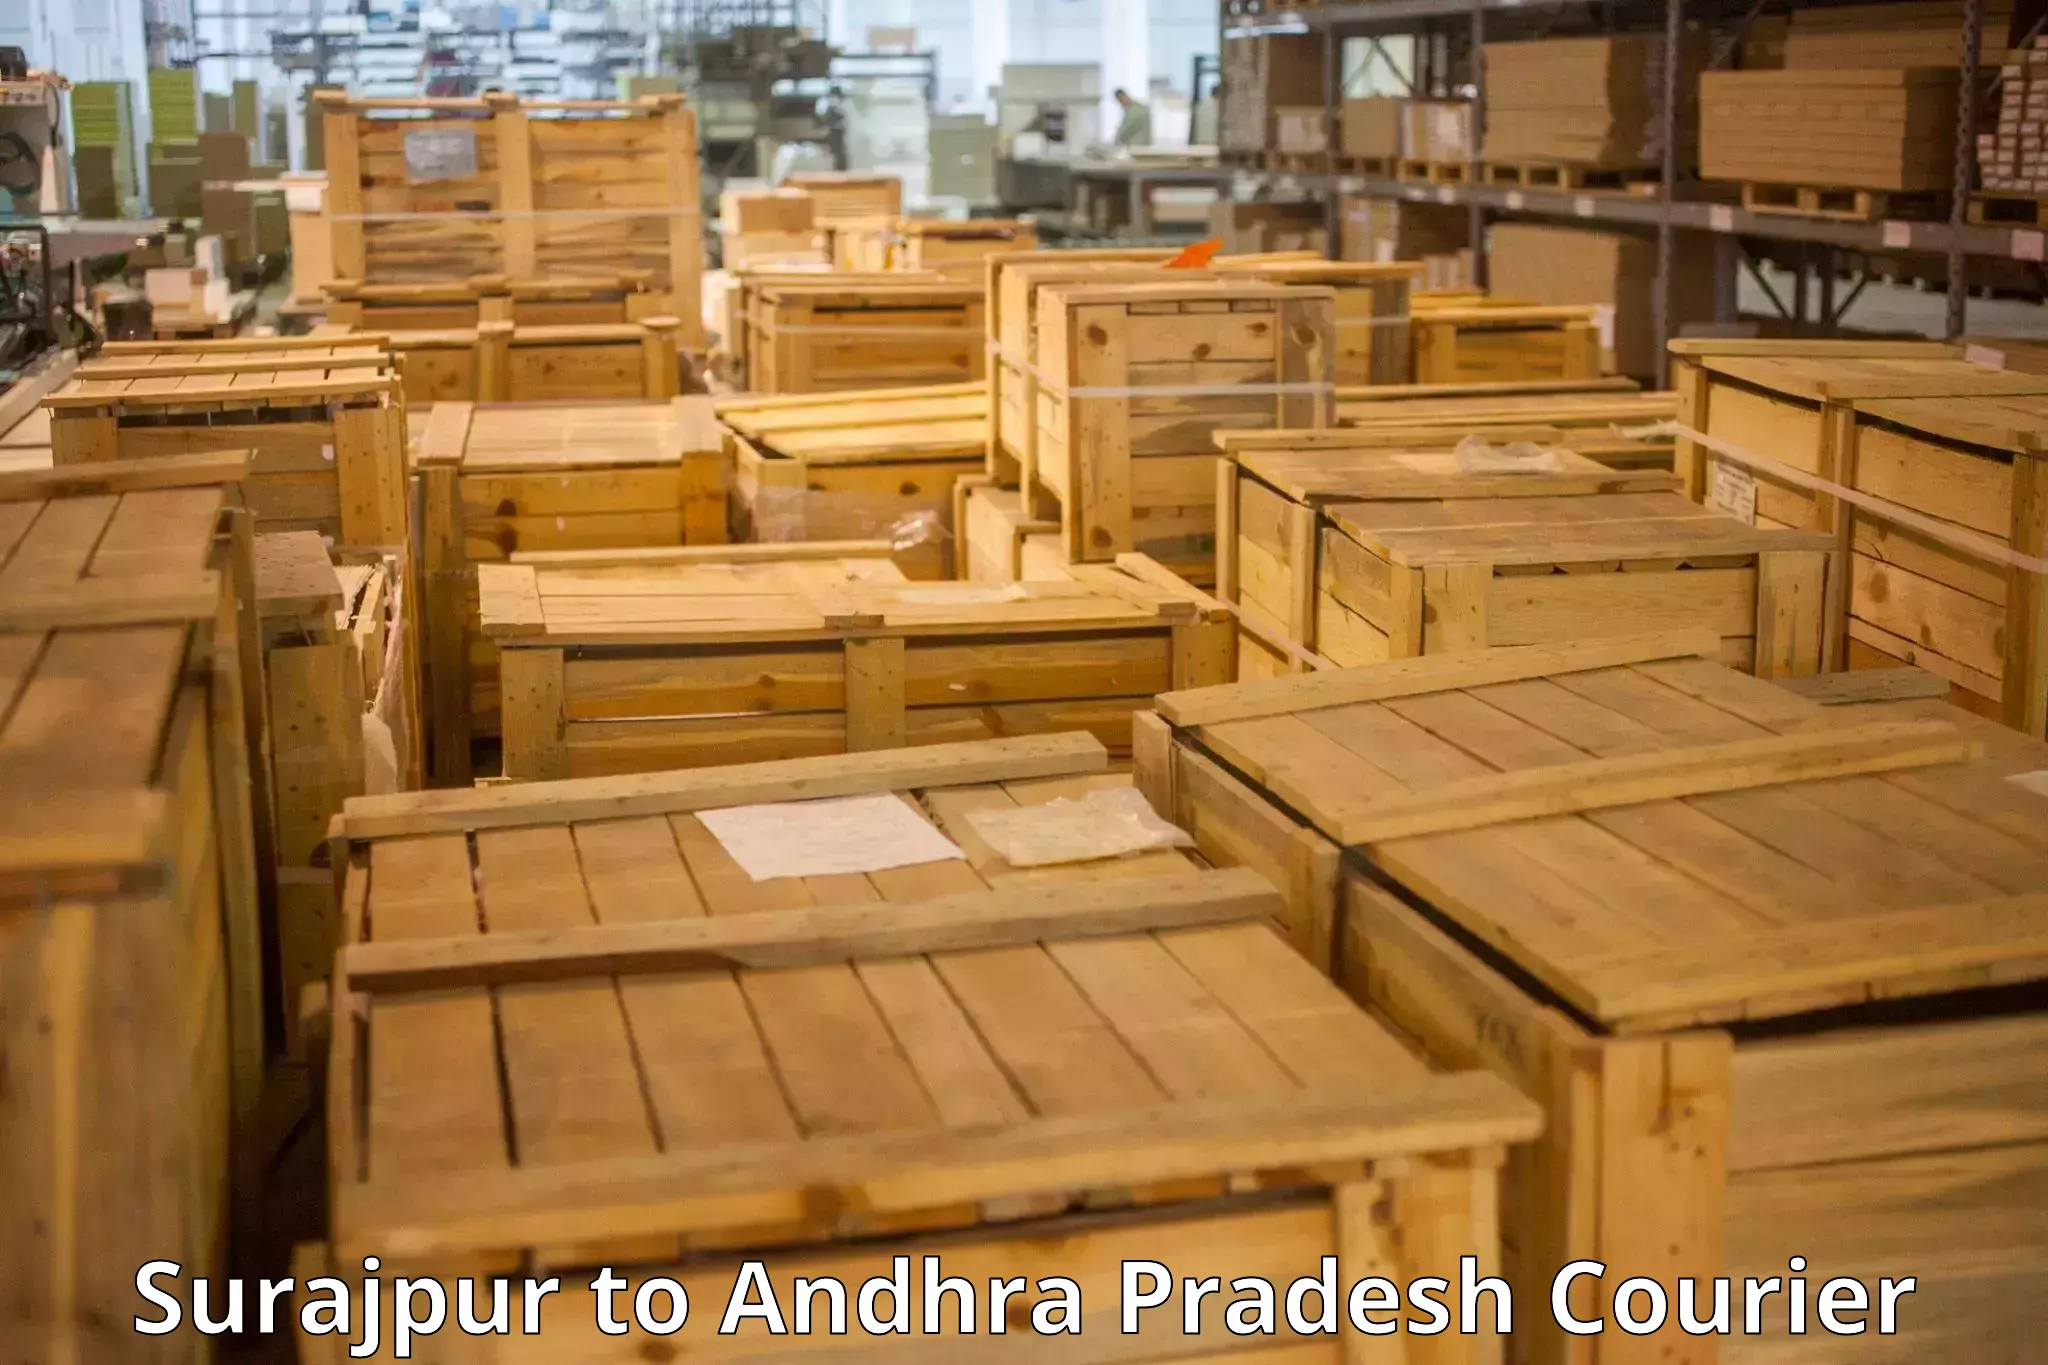 Luggage shipment specialists Surajpur to Hindupur